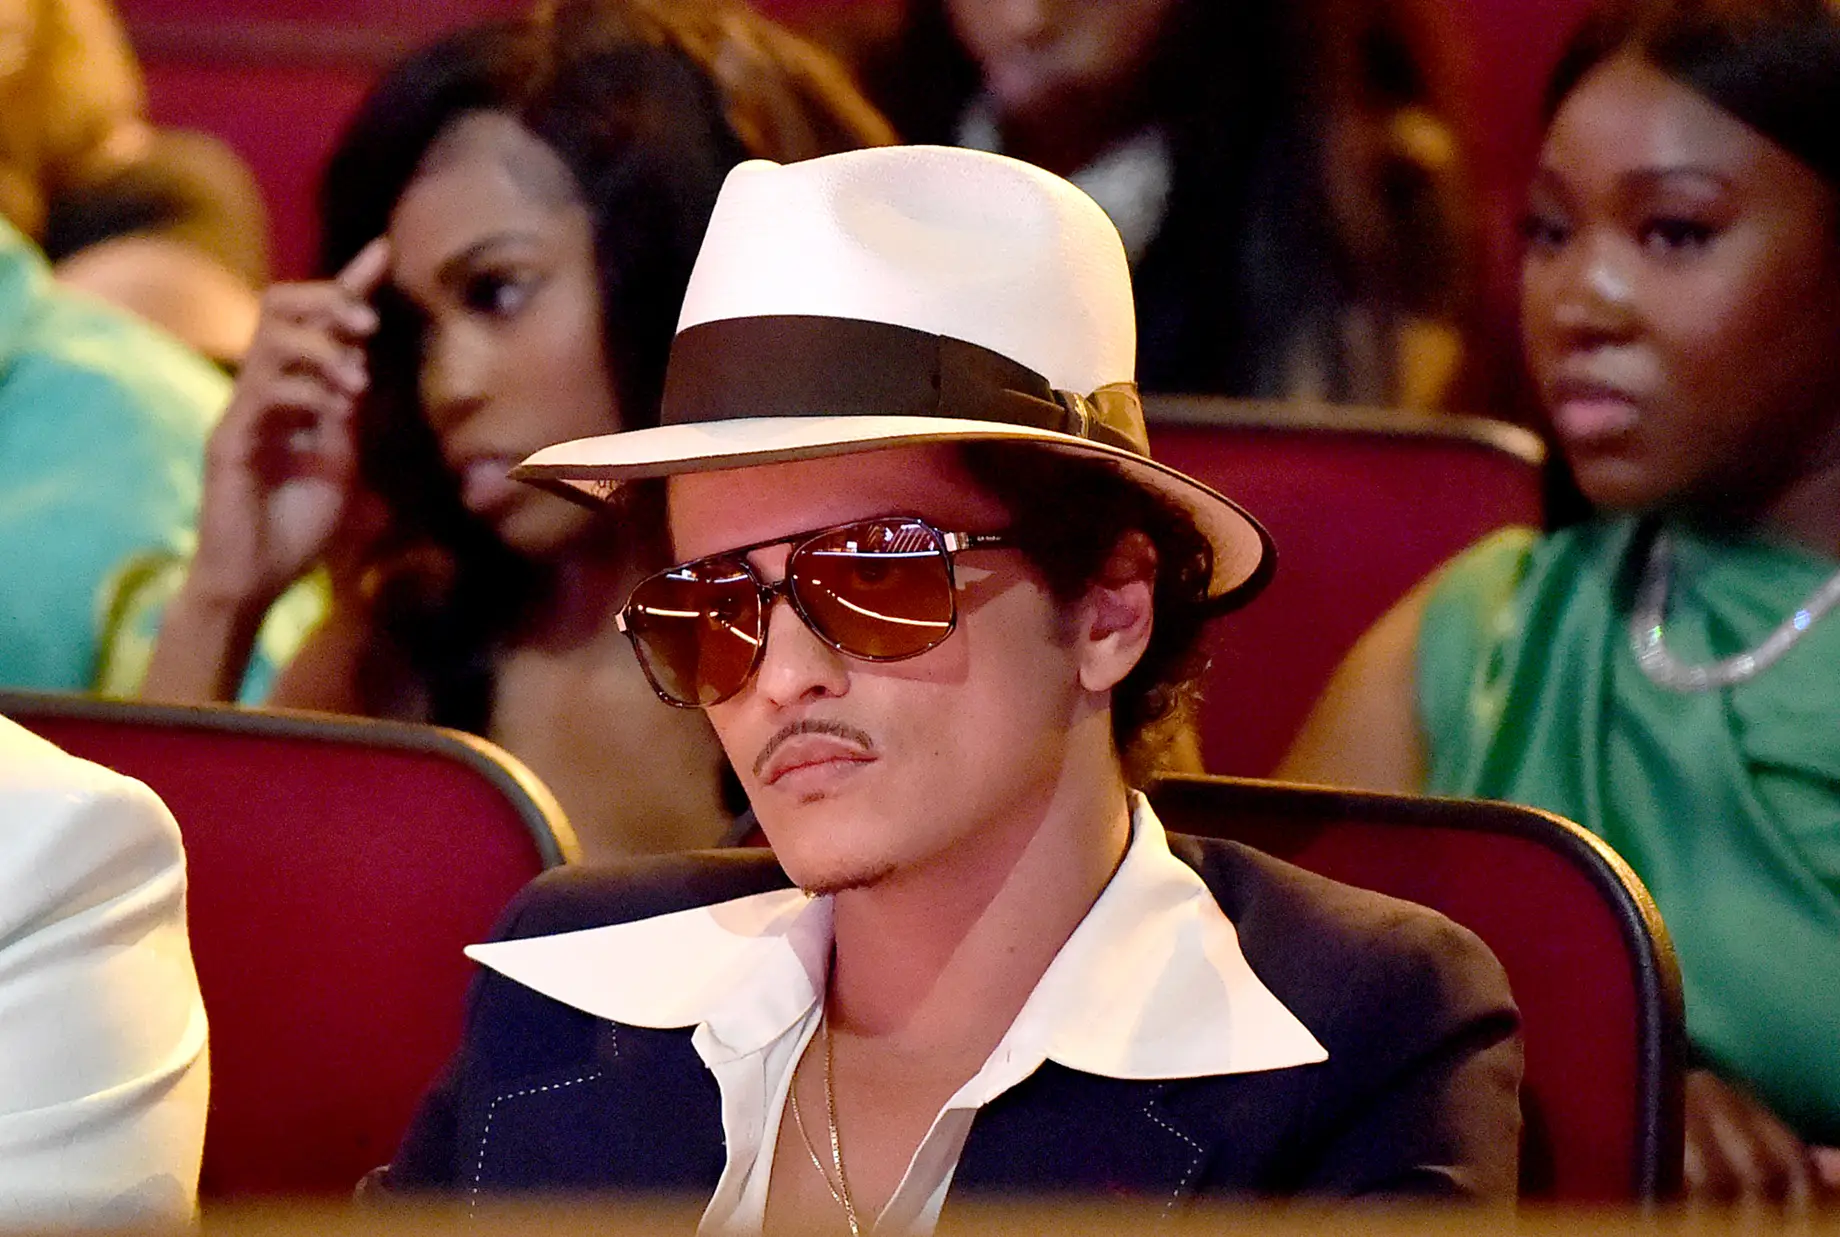 Bruno Mars Has Allegedly Racked Up $50 Million In Gambling Debt At MGM